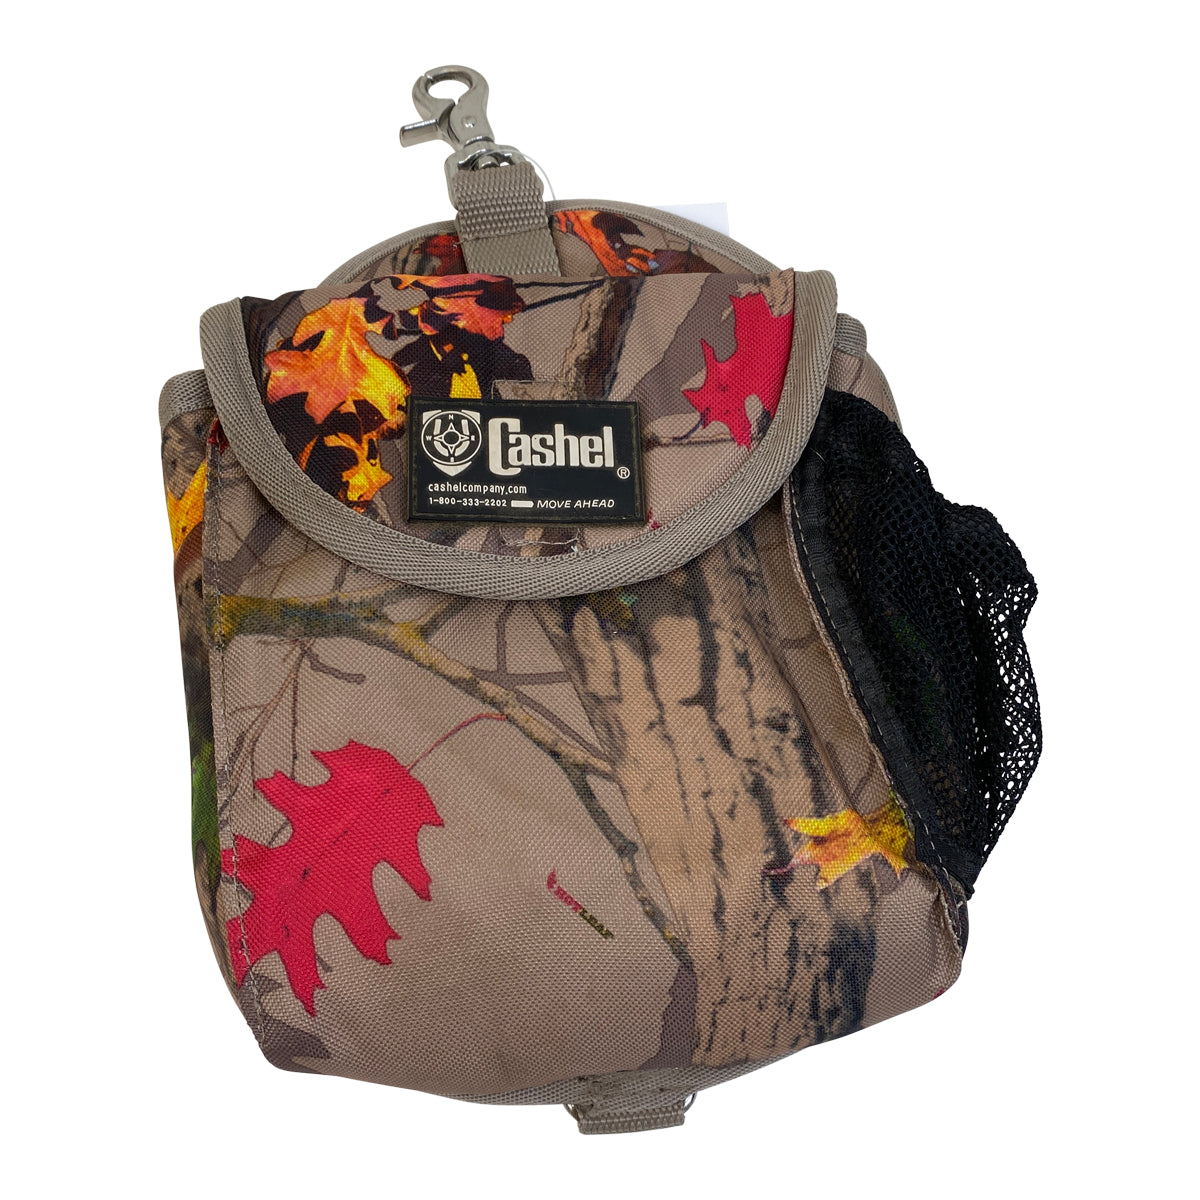 Cashel Snap-On Bag in Pink Camo